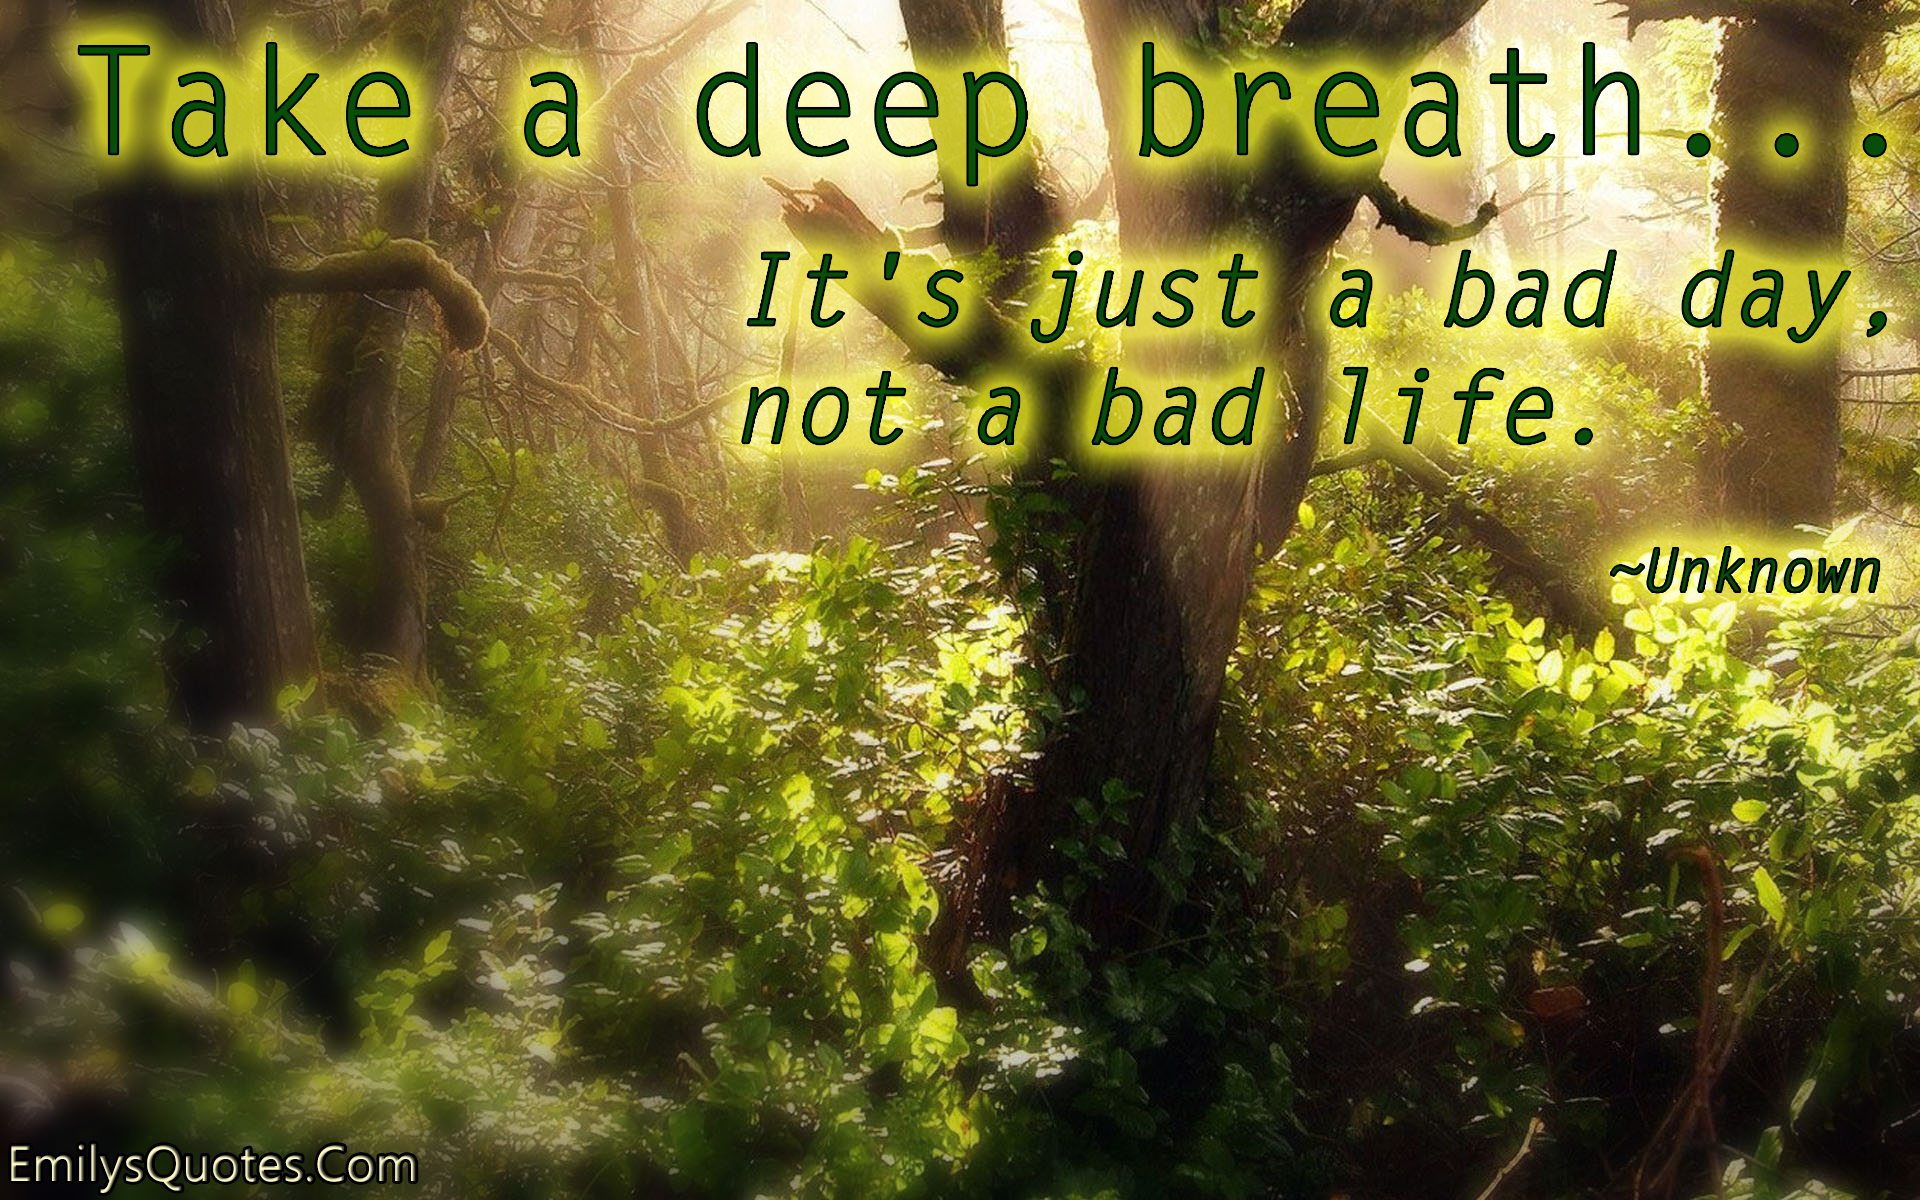 Take a deep breath. It’s just a bad day, not a bad life